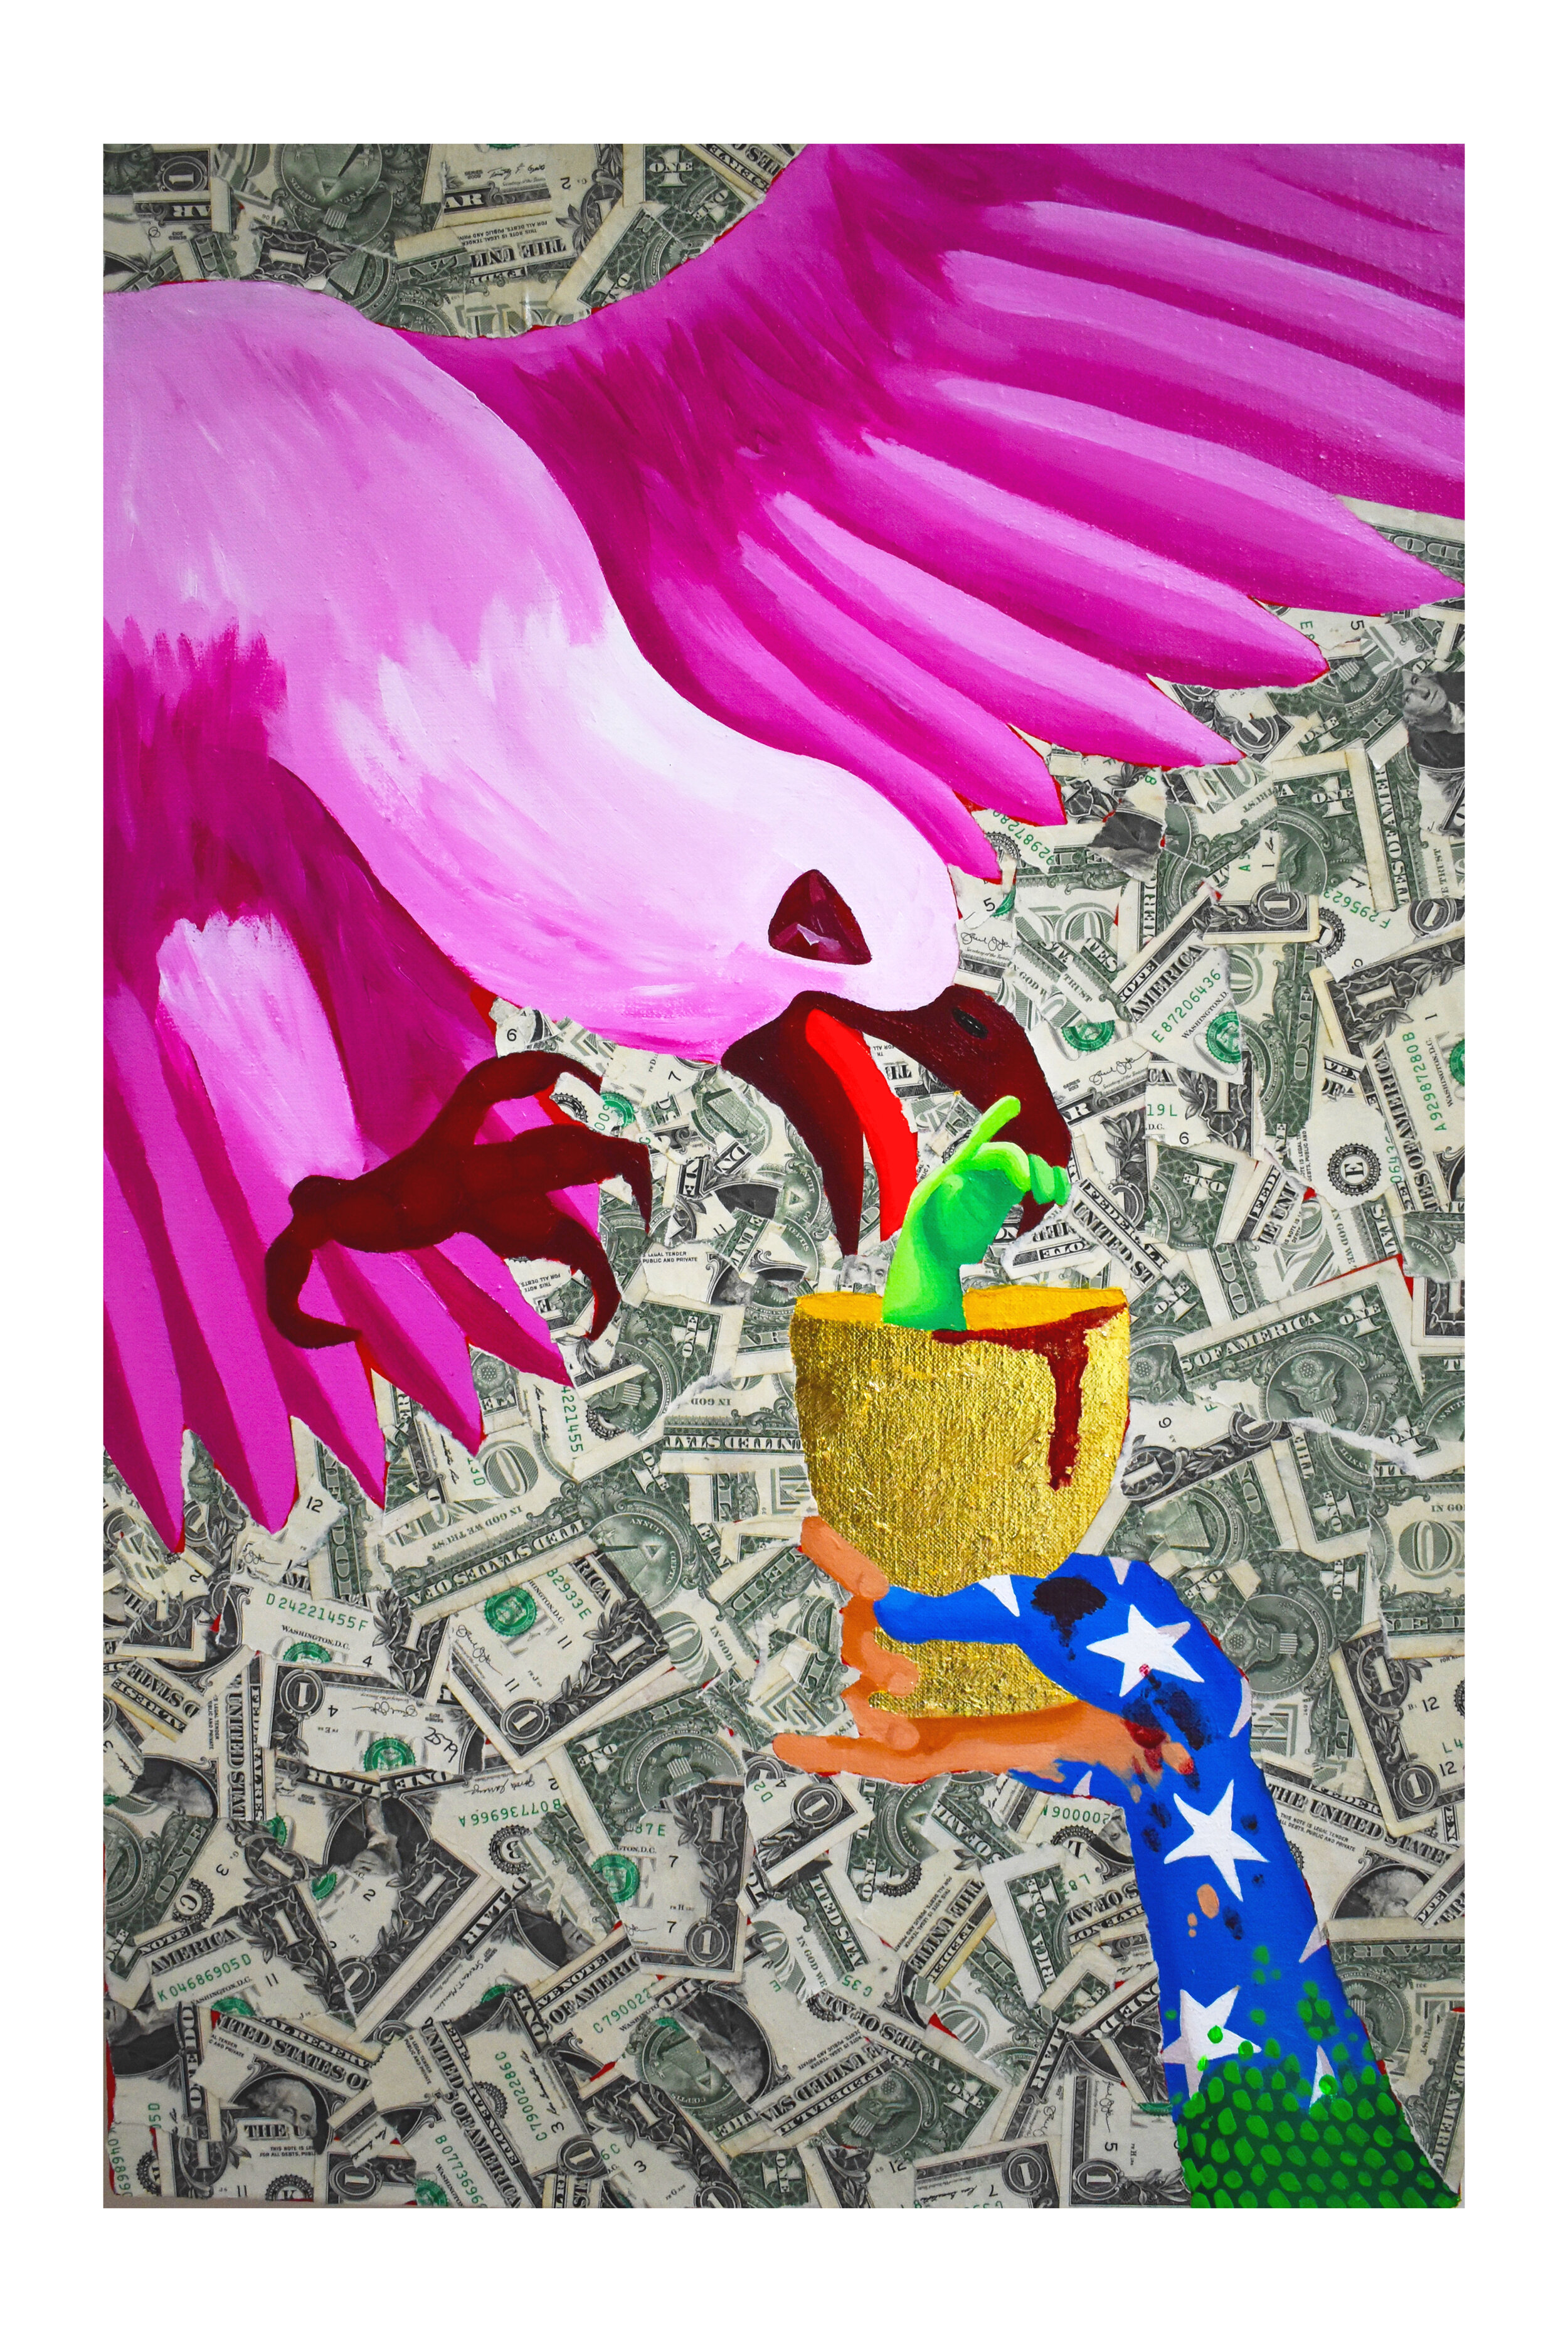  Lib erty Hand Giving Support to the Pink Bald Eagle , 2019  25 x 16 x 1.5 inches (63.5 x 40.64 x 3.81 cm.)  Acrylic, gold leaf, and American dollar bills on linen  Private collection 